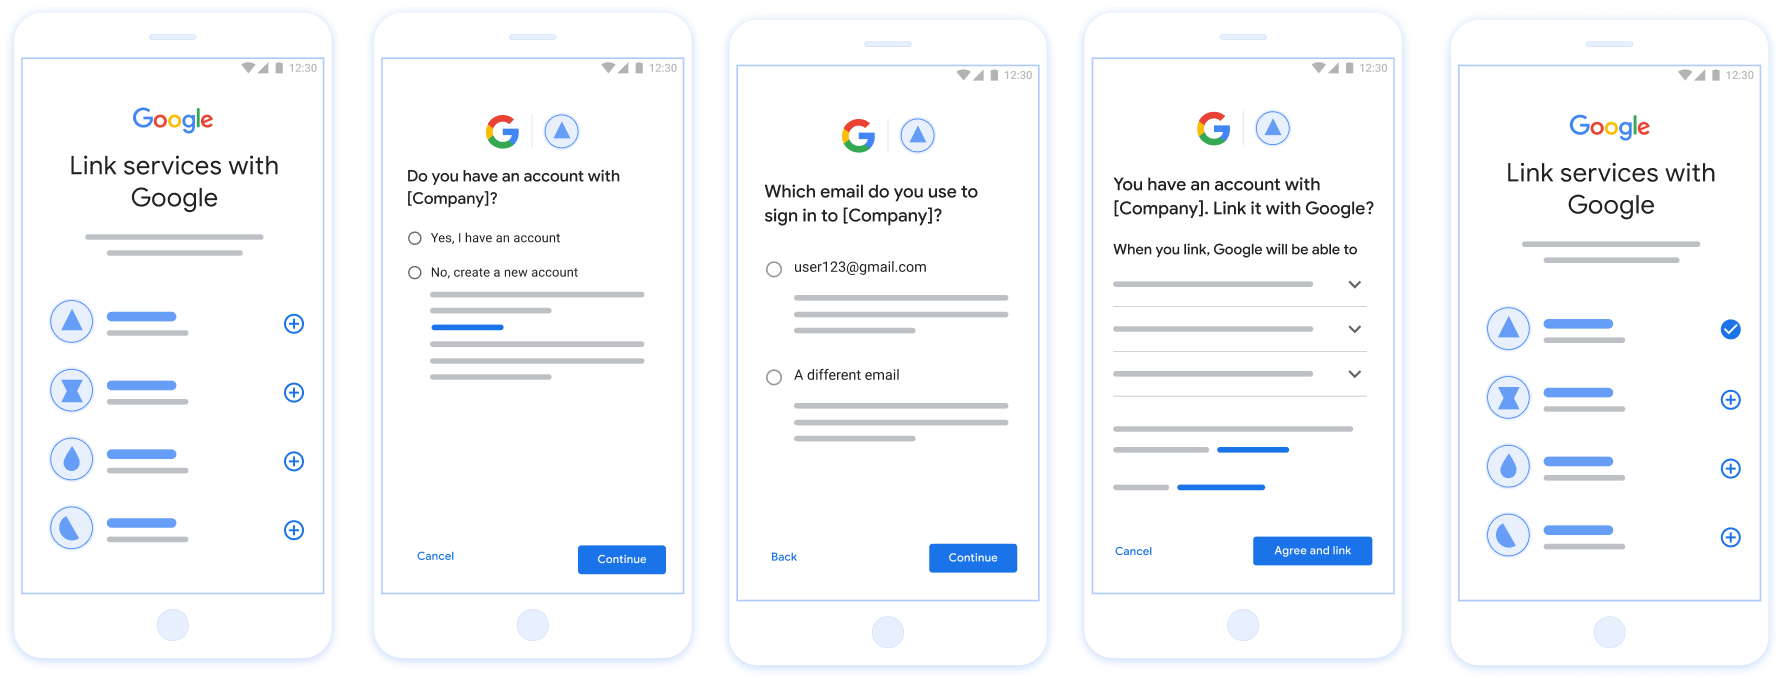 This figure shows the steps for a user to link their Google account using the streamlined linking flow. The first screenshot shows how a user can select your app for linking. The second screenshot lets the user confirm whether or not they have an existing account on your service. The third screenshot lets the user select the Google account they want to link with. The fourth screenshot shows the confirmation for linking their Google account with your app. The fifth screenshot shows a successfully linked user account in the Google app.